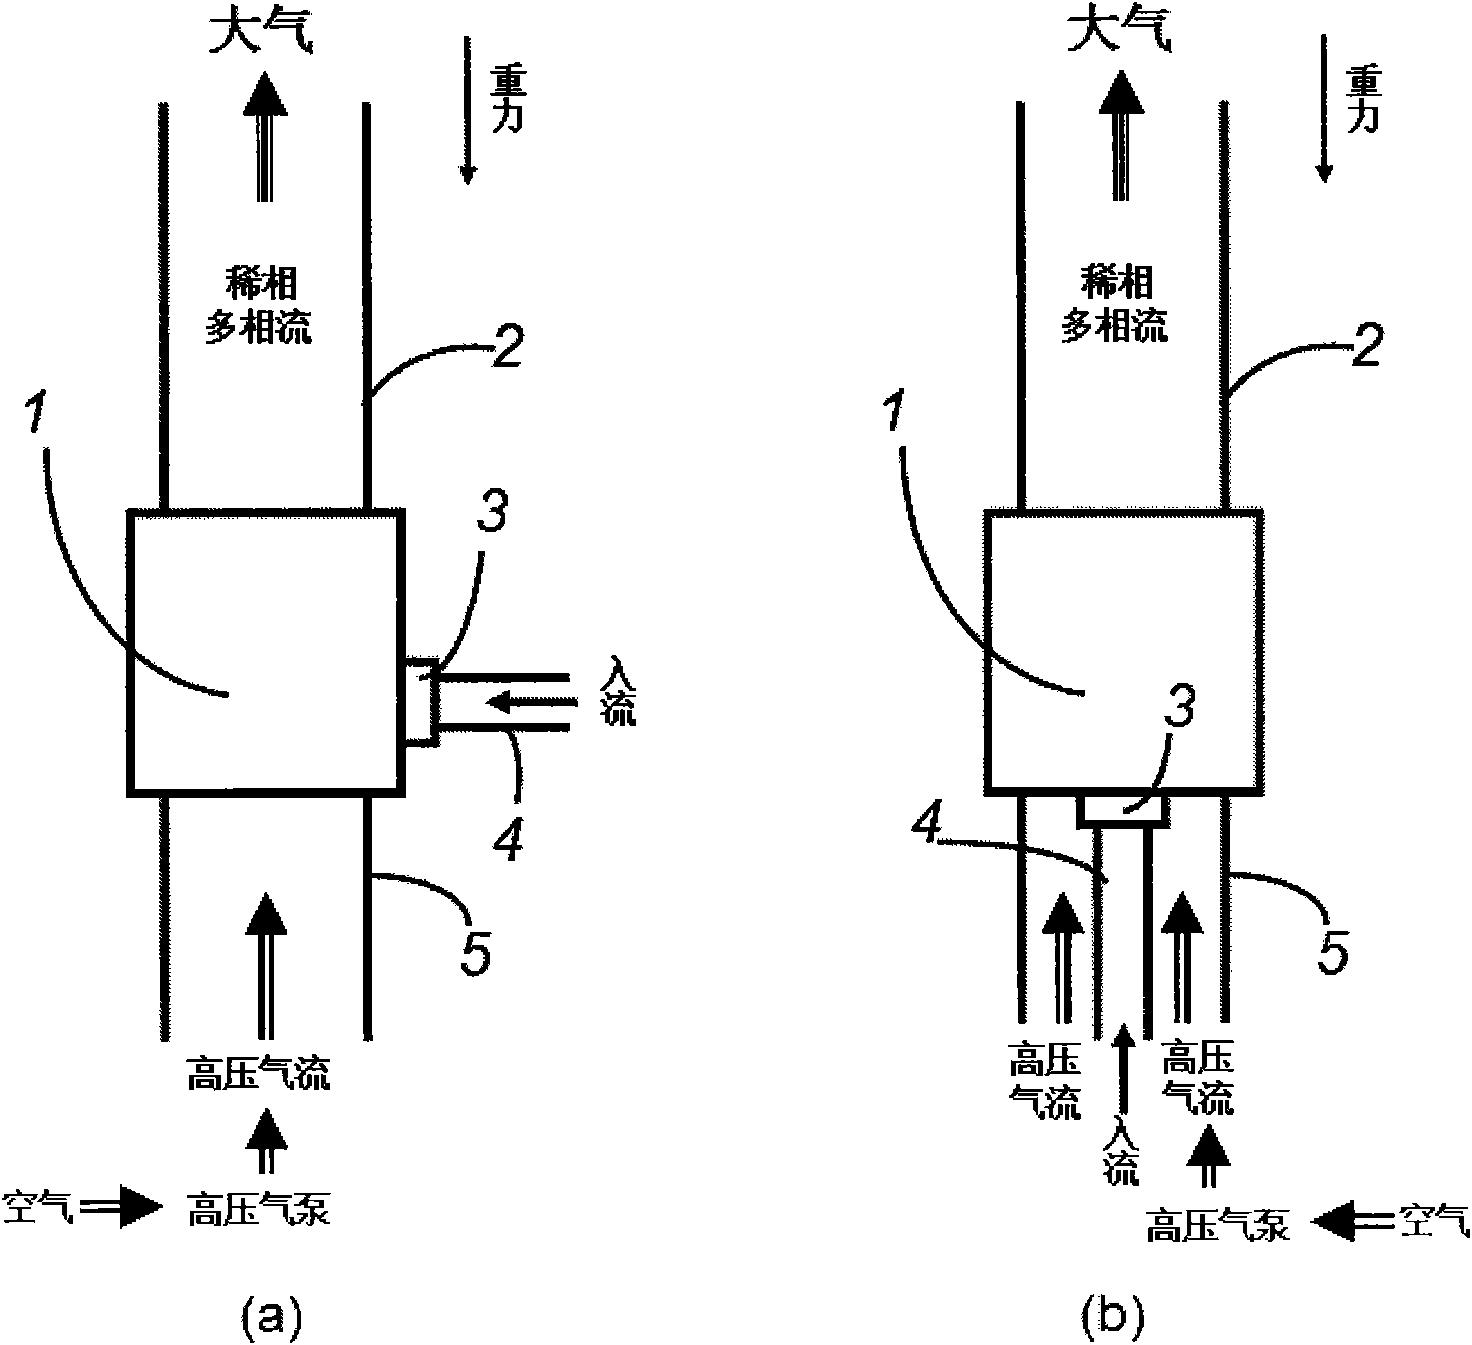 Antigravity dilute-phase pneumatic conveying device for fluid